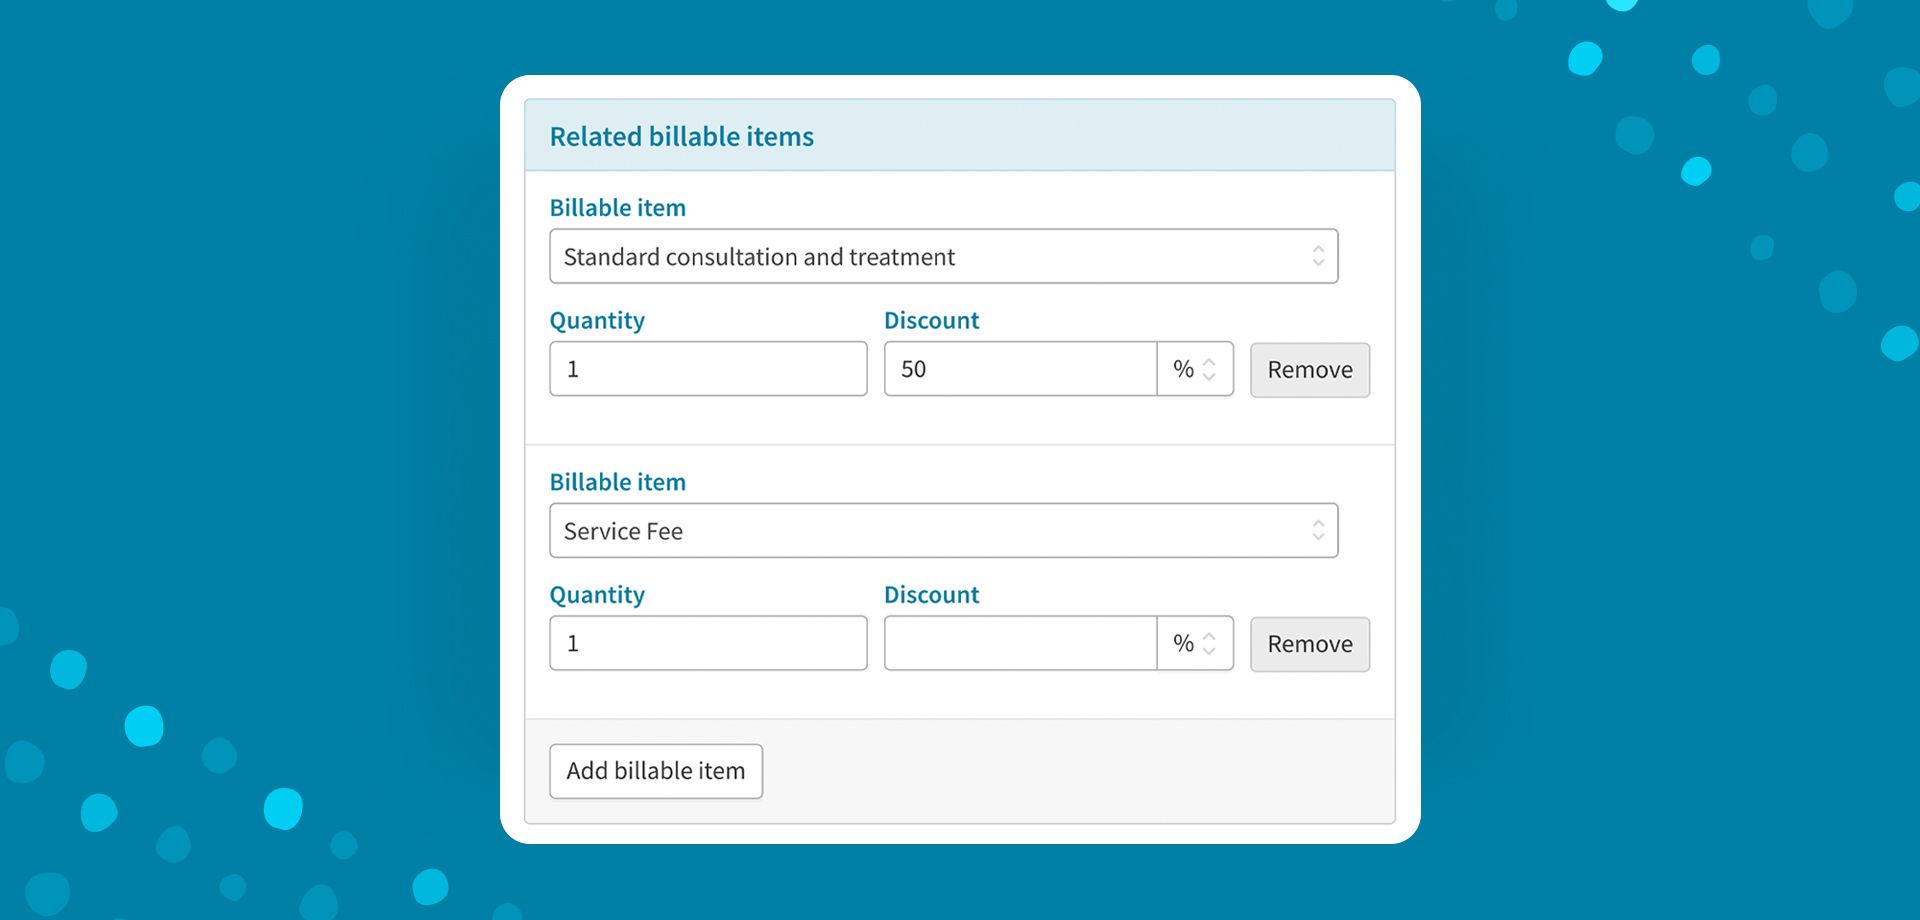 Screenshot of related billable items. Example includes standard consultation and treatment with a discount of 50%. The other is a Service fee.